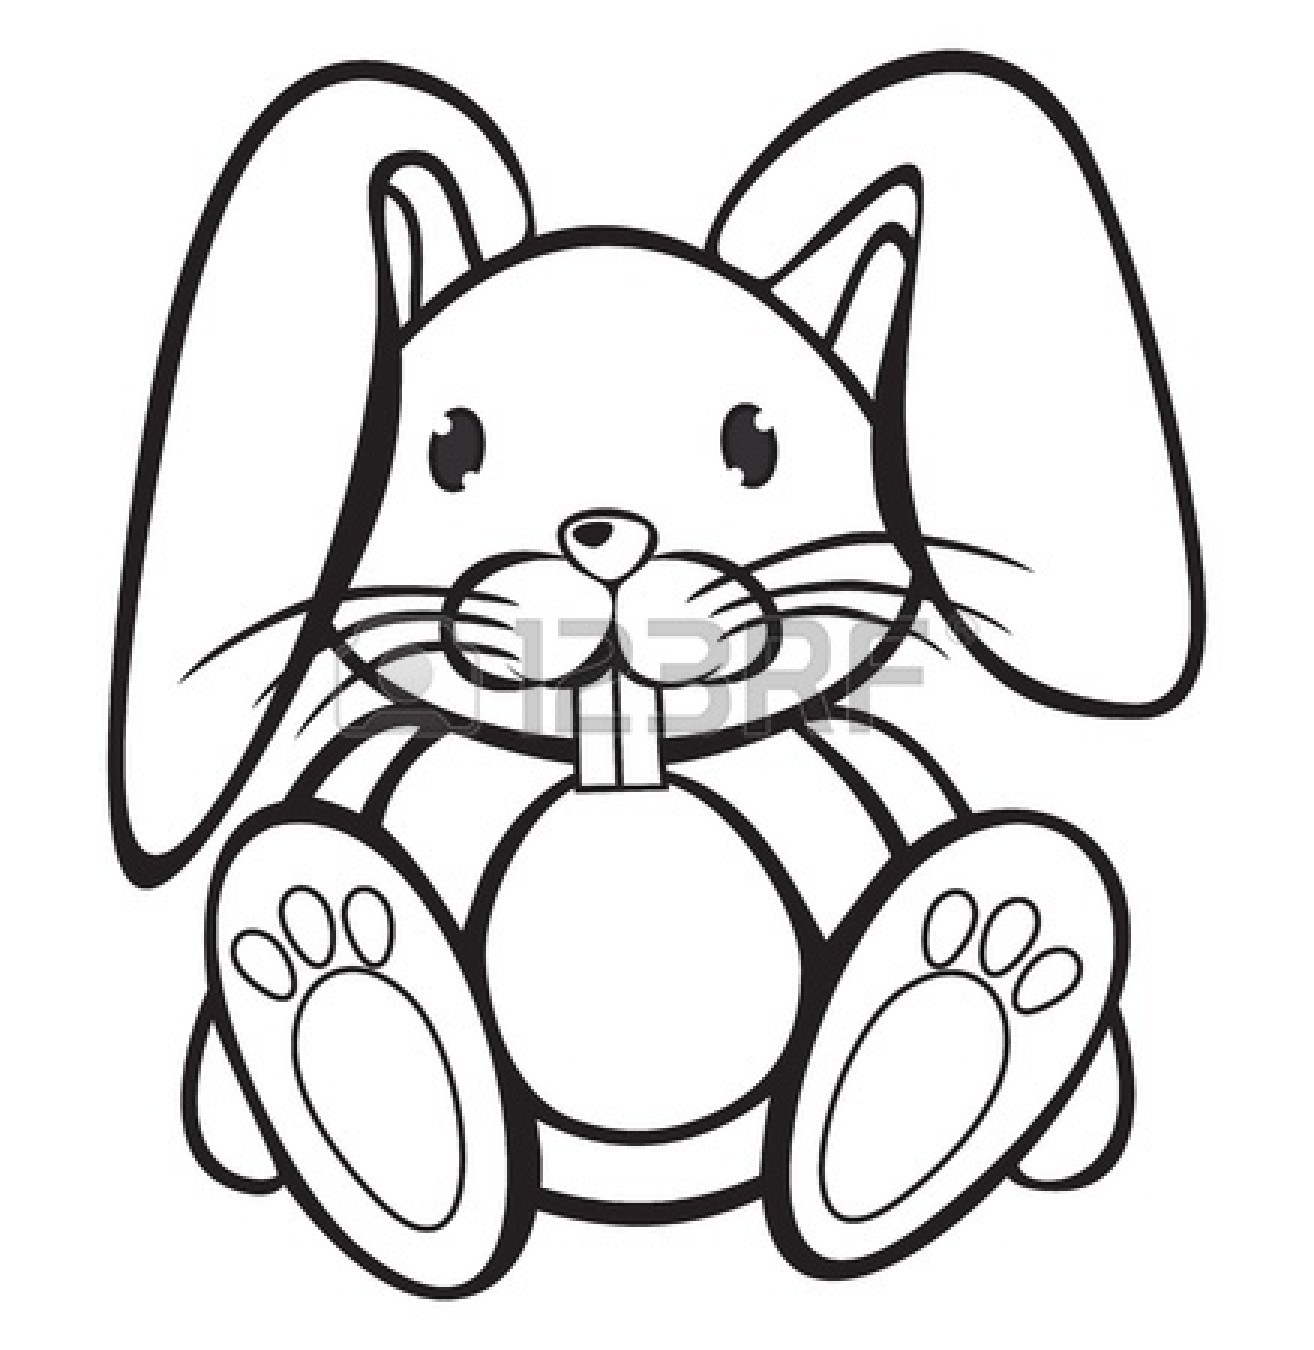 Bunny Black And White Clipart | Free download on ClipArtMag